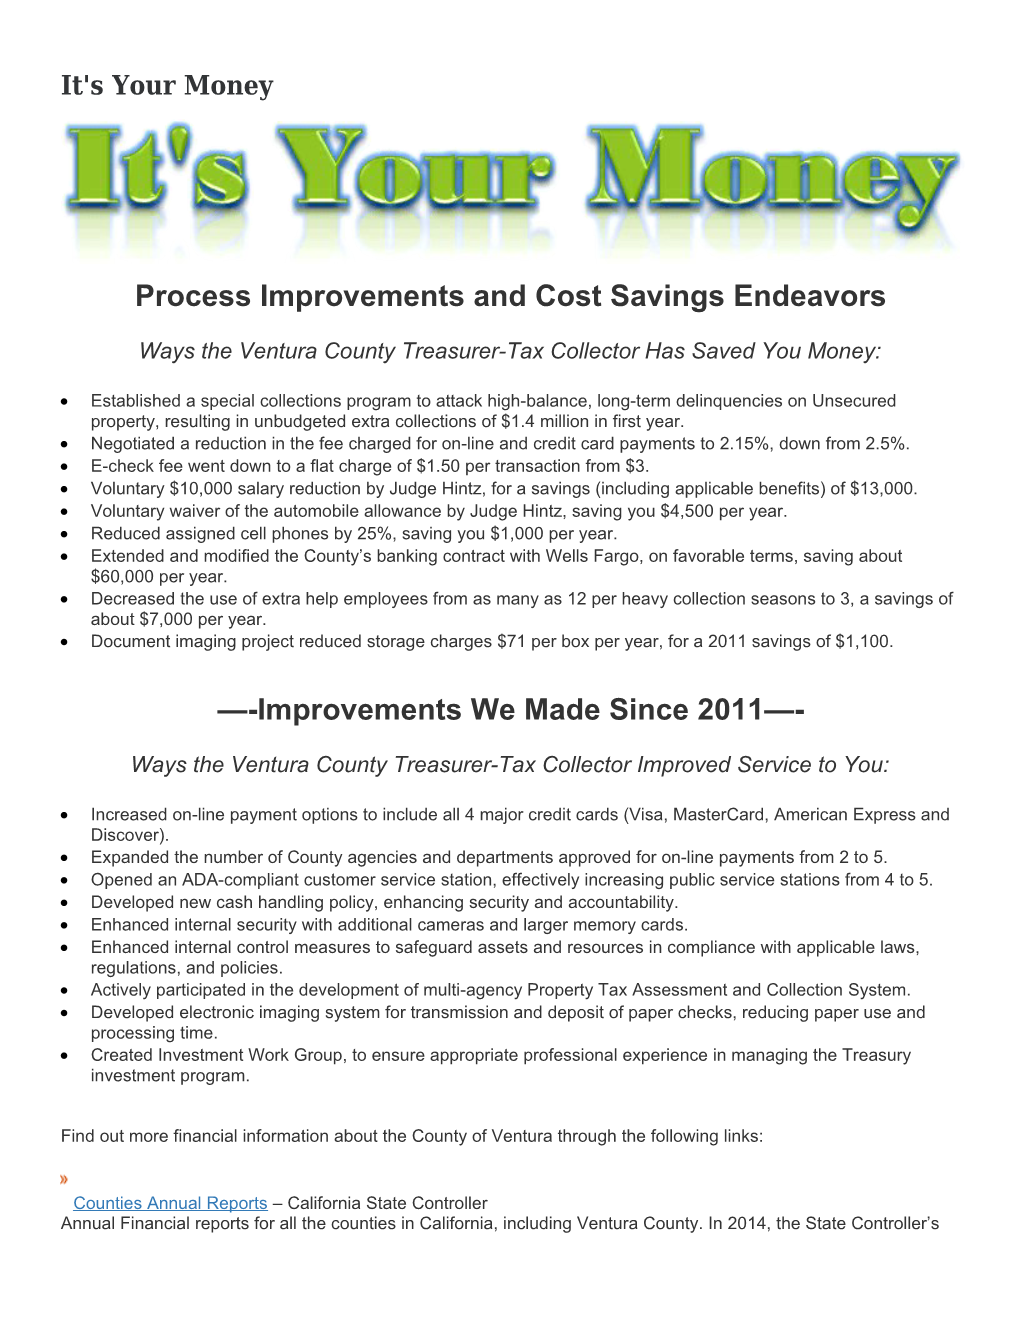 Process Improvements and Cost Savings Endeavors